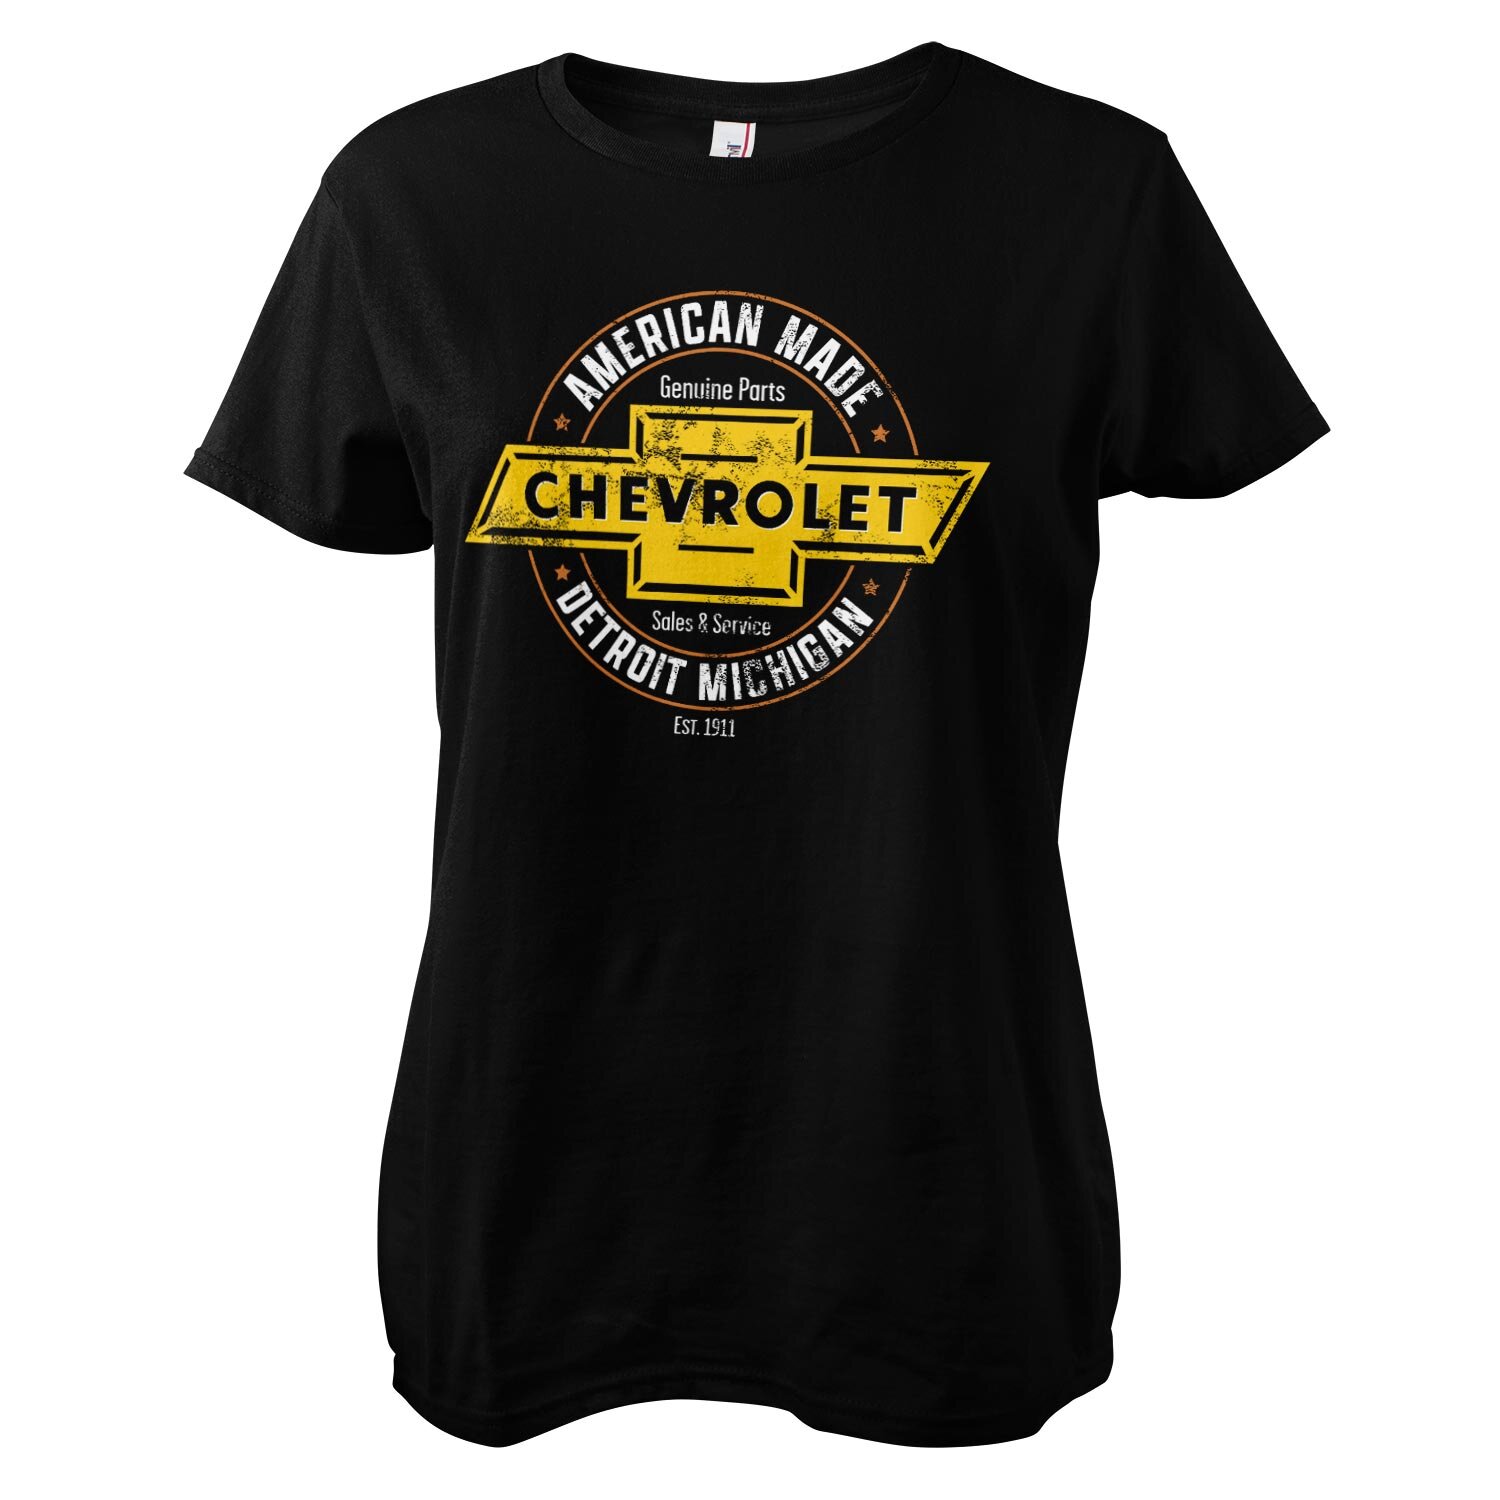 Chevrolet - American Made Girly Tee